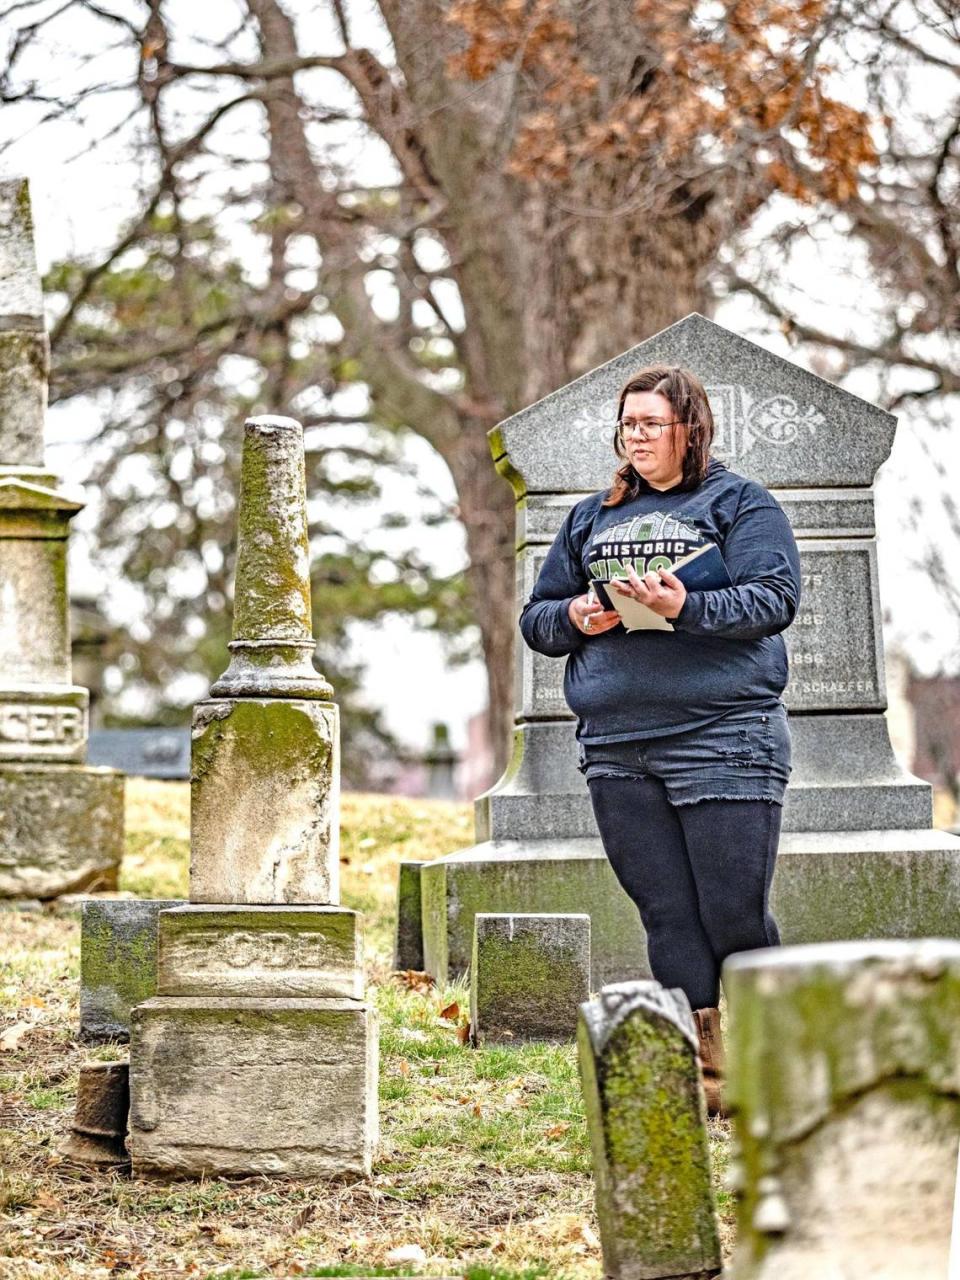 Heather Faries, vice president of the Union Cemetery Historical Society, checks the condition of gravestones. Founded in 1857, Union Cemetery is Kansas City’s oldest public graveyard.